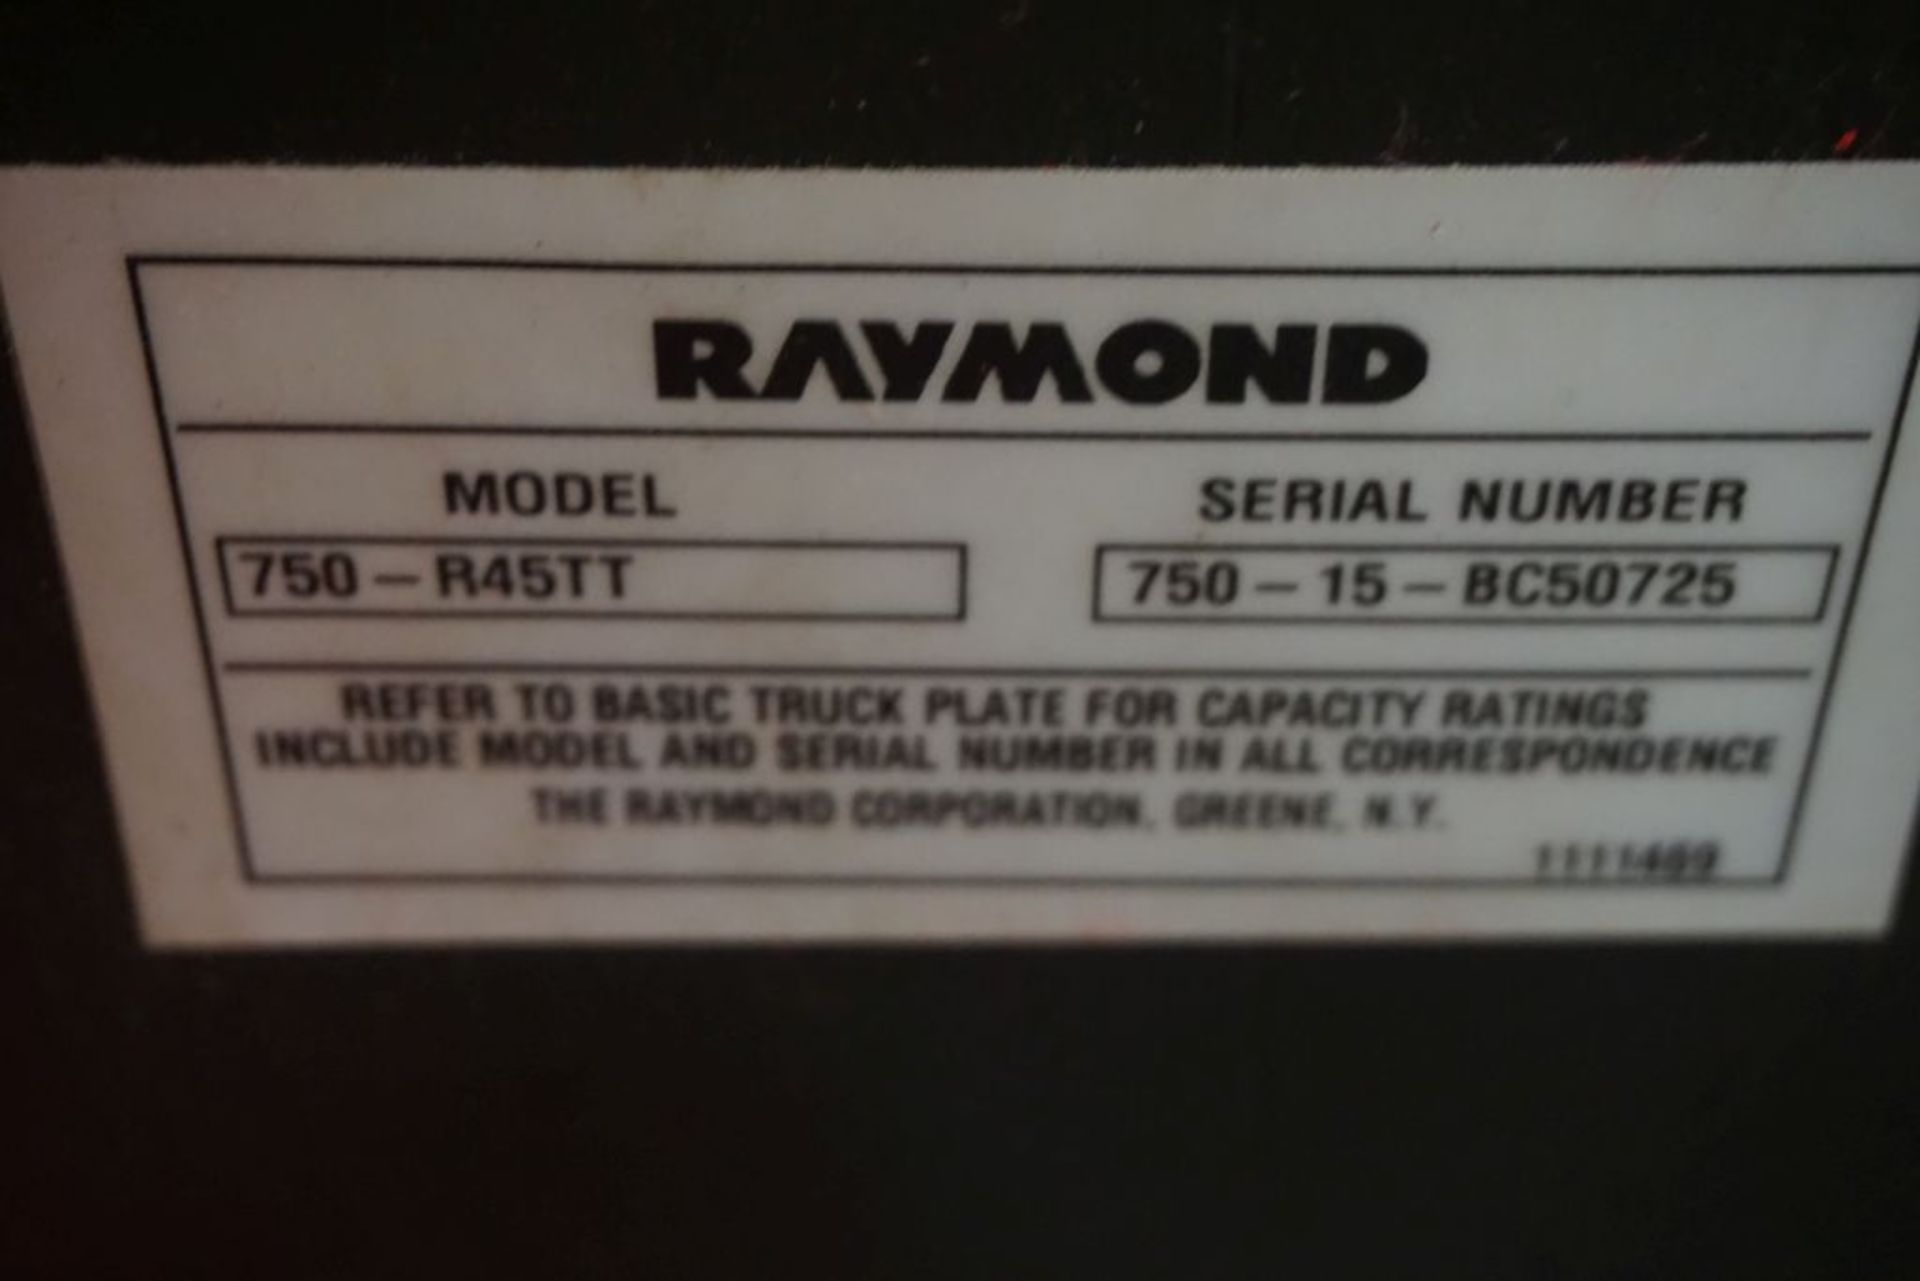 Raymond 7500 Universal Stance Reach Forklift - Model No. 750-R45TT; Serial No. 750-15-BC50725; - Image 16 of 19